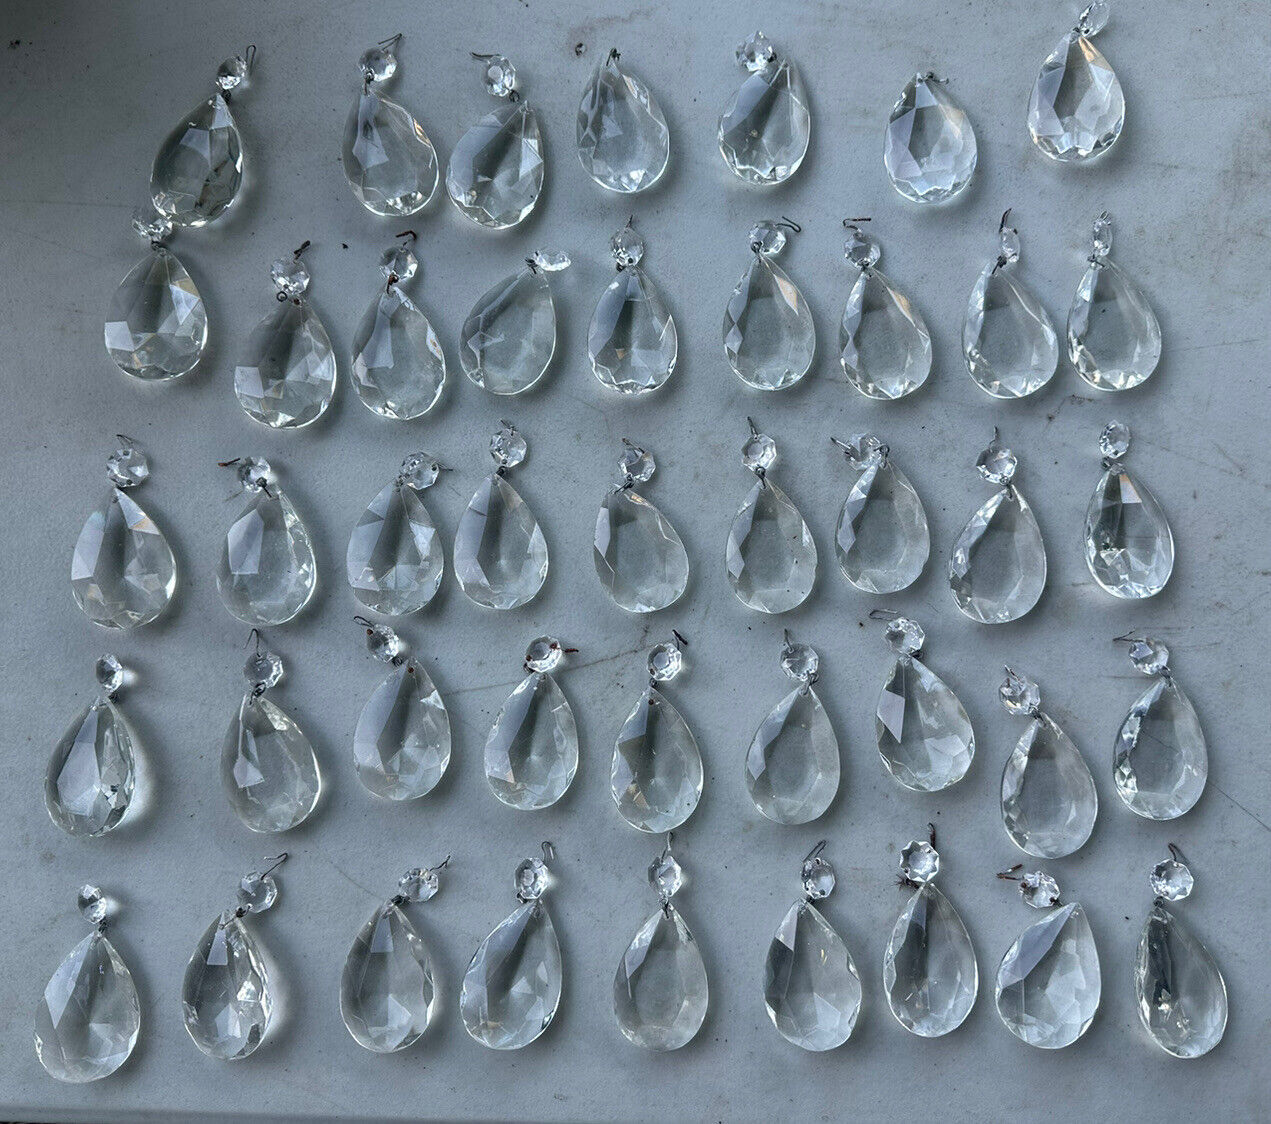 43 Vintage Matching Clear Glass or Crystal Teardrop 2.25” Prisms w .5” Top Bead